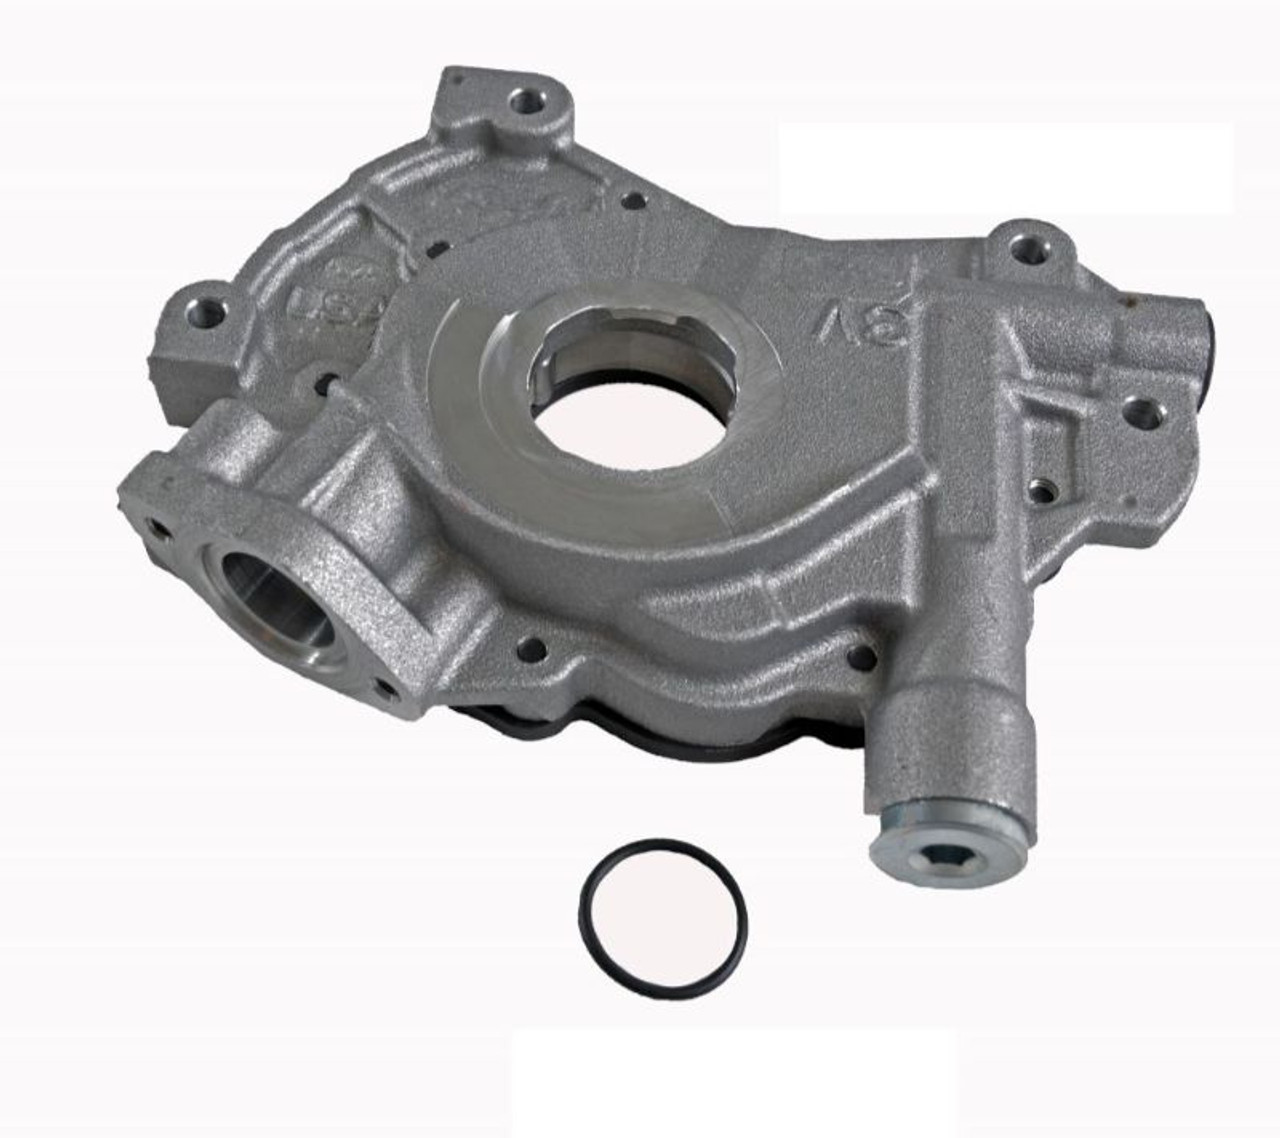 Oil Pump - 2007 Ford Expedition 5.4L (EP340.B18)